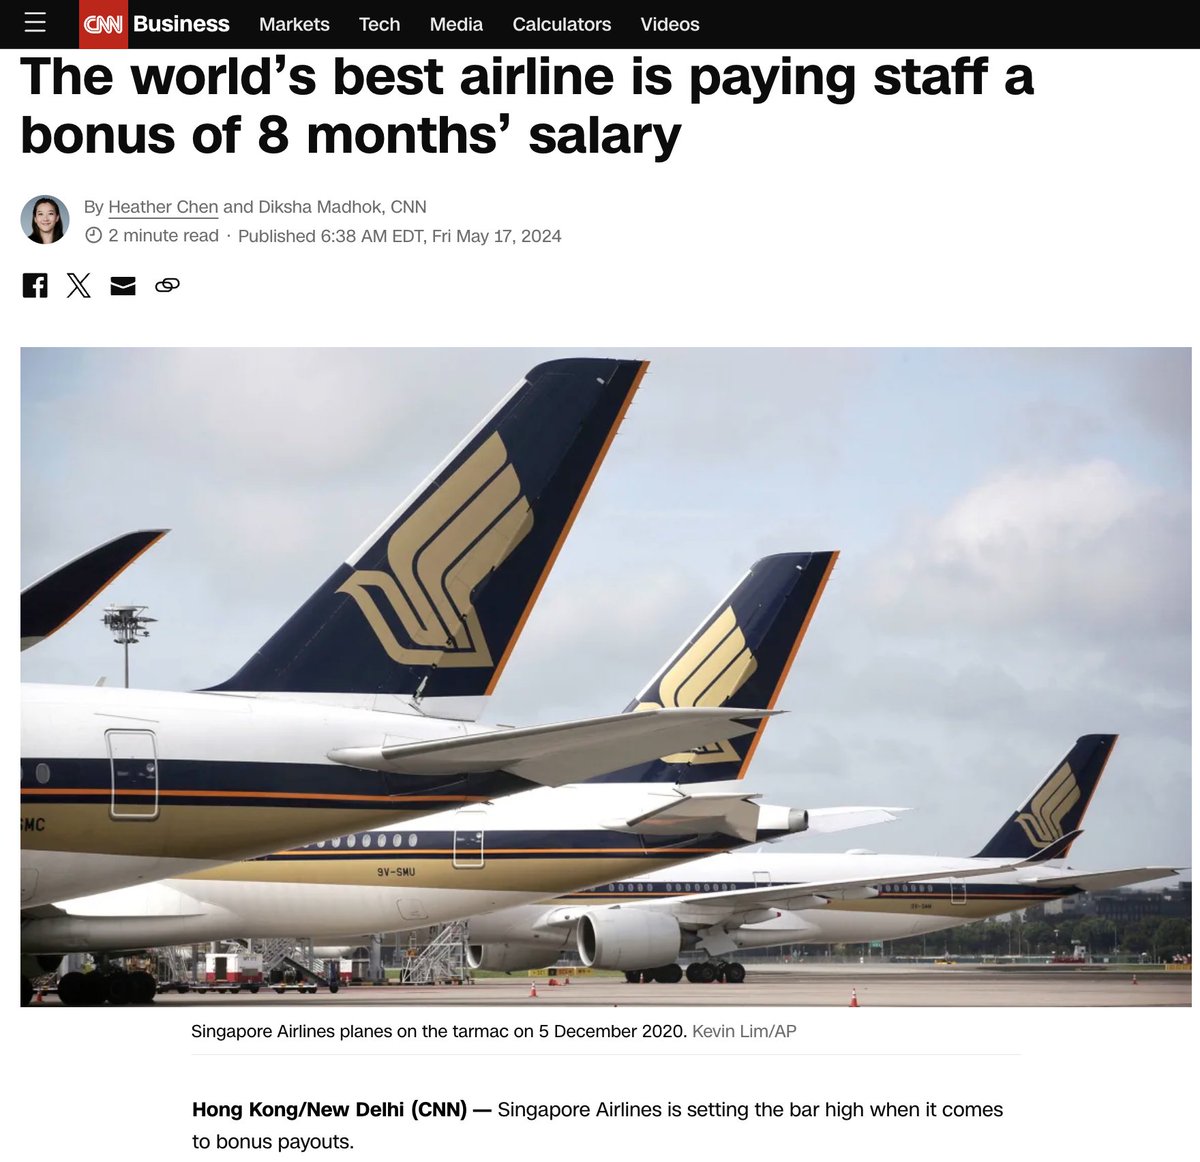 Singapore Airlines workers are getting a bonus worth 8 months' salary. Emirates staff are getting a bonus worth 4 months' salary. Your employer?